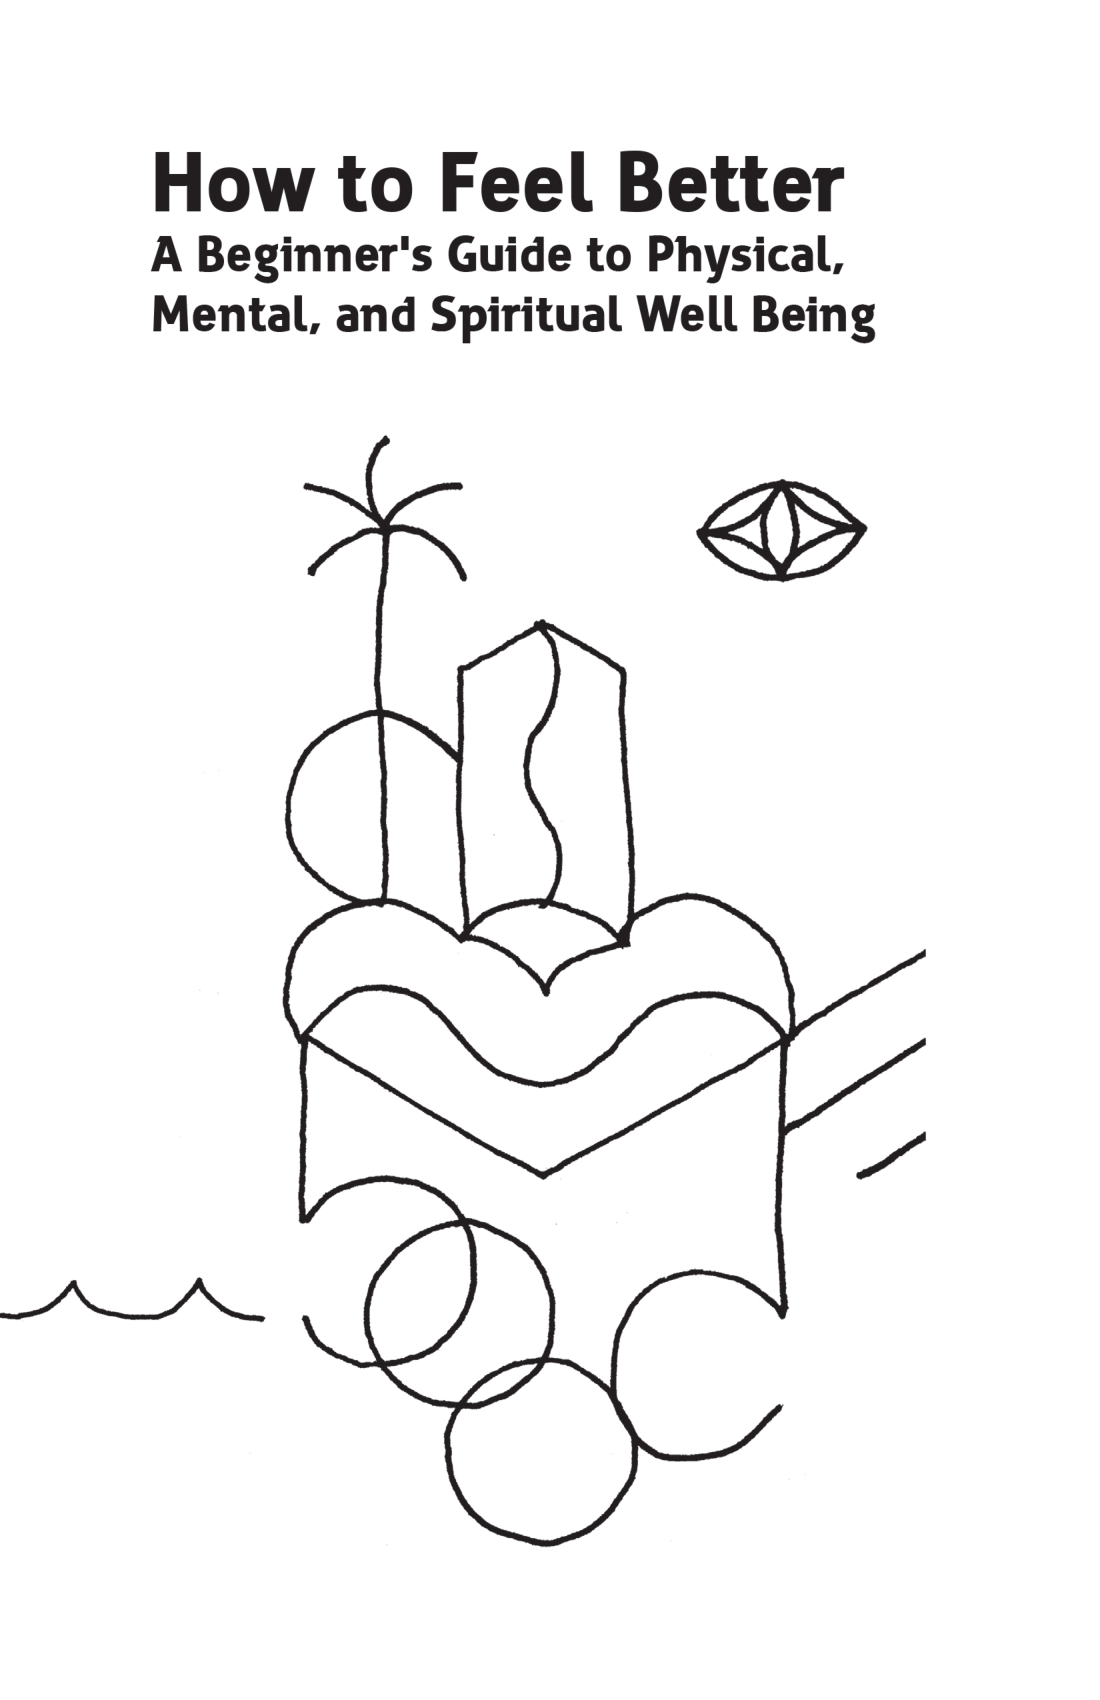 Book cover of How to feel better, a beginners guide to psychical, metal, and spiritual well being.